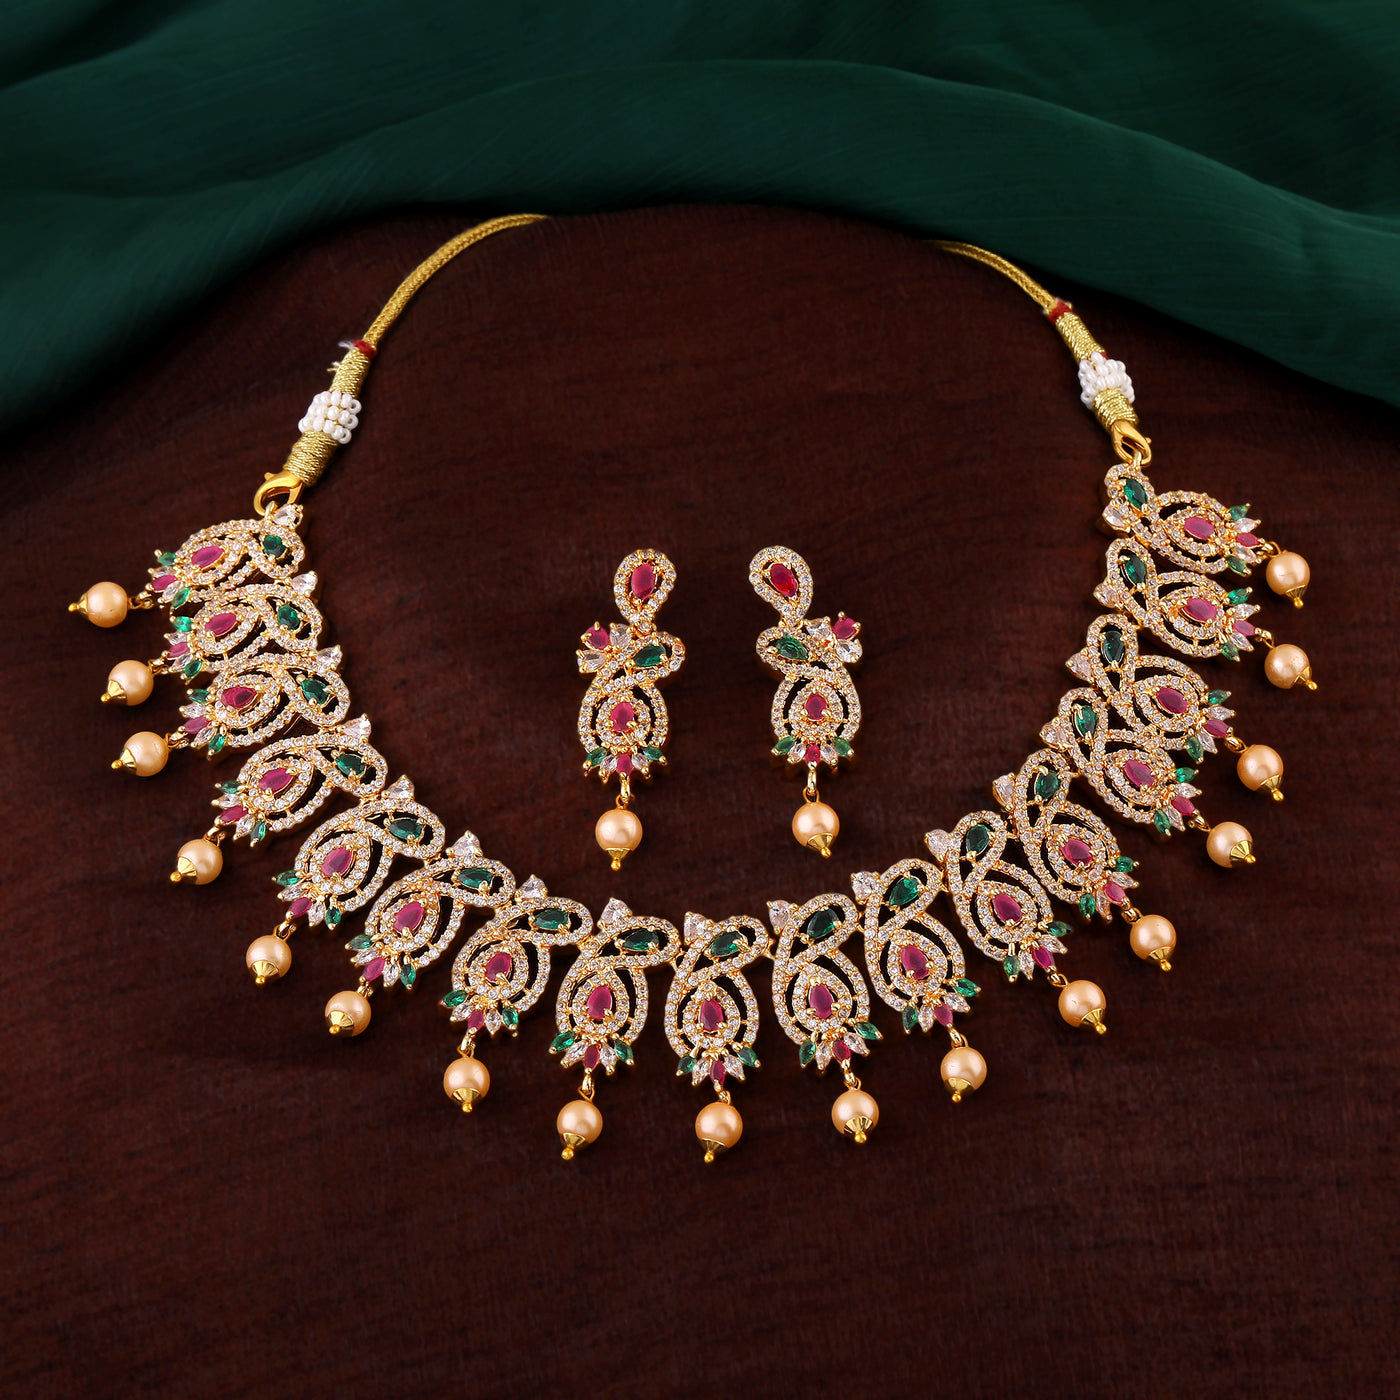 Estele Gold Plated CZ Magnificent Designer Necklace Set with Colored Stones & Pearls for Women